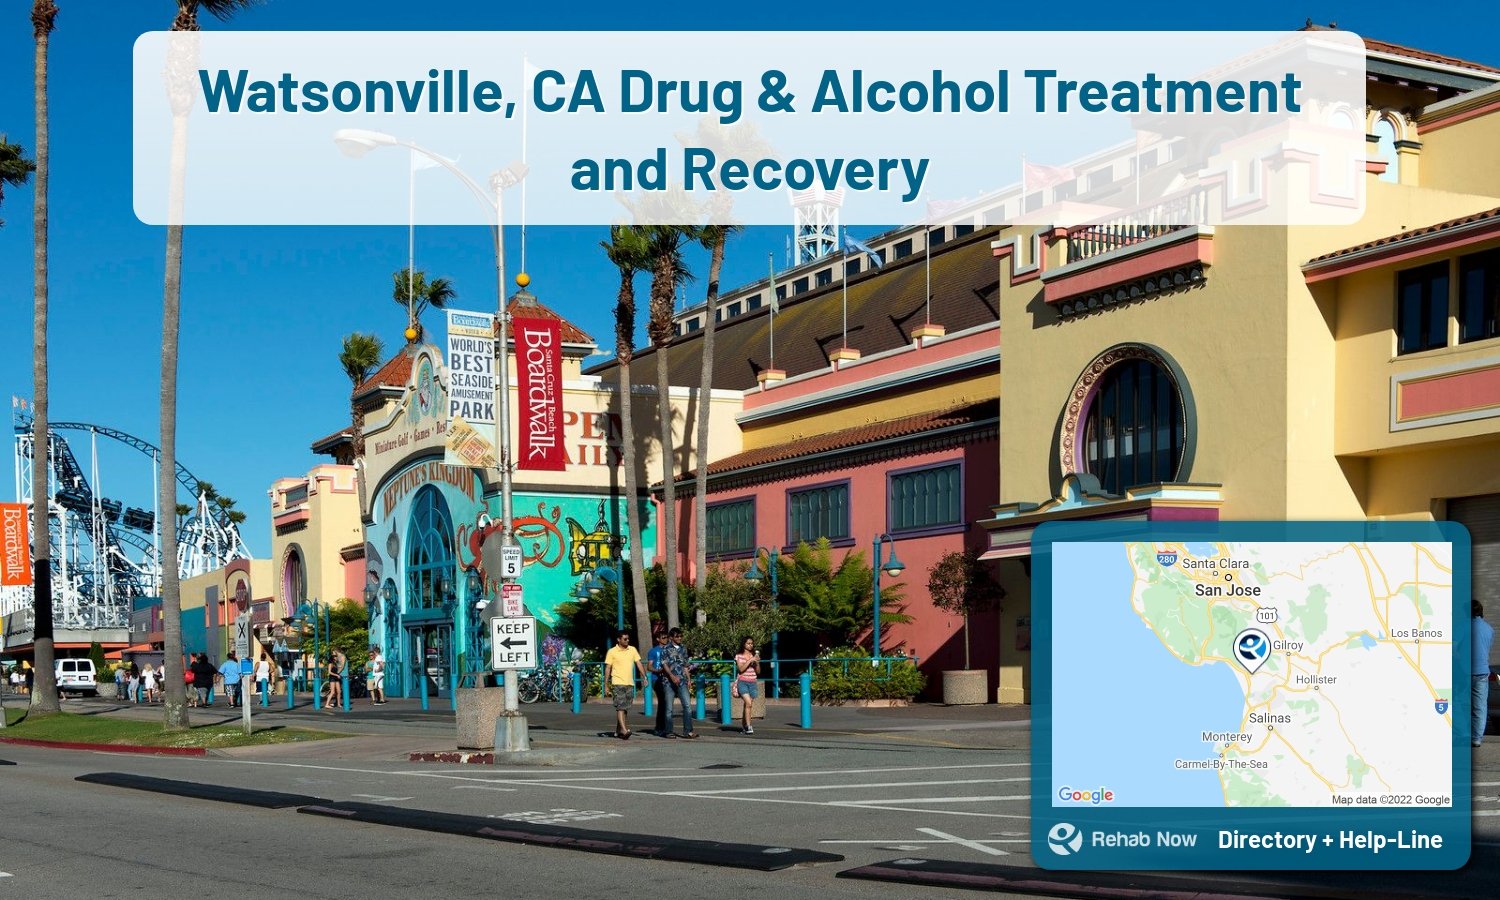 Drug rehab and alcohol treatment services nearby Watsonville, CA. Need help choosing a treatment program? Call our free hotline!